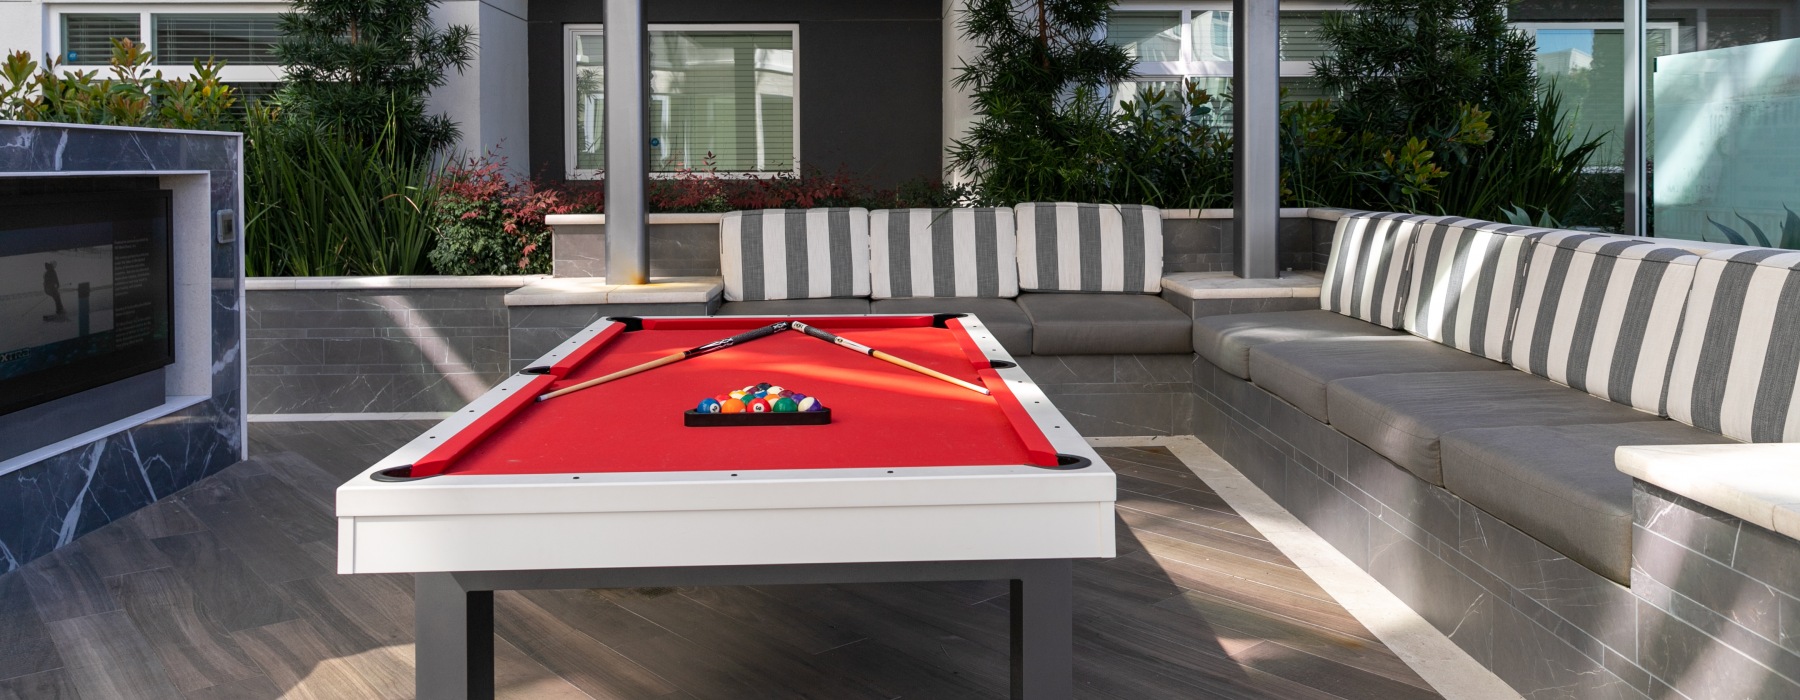 pool table with seating around it